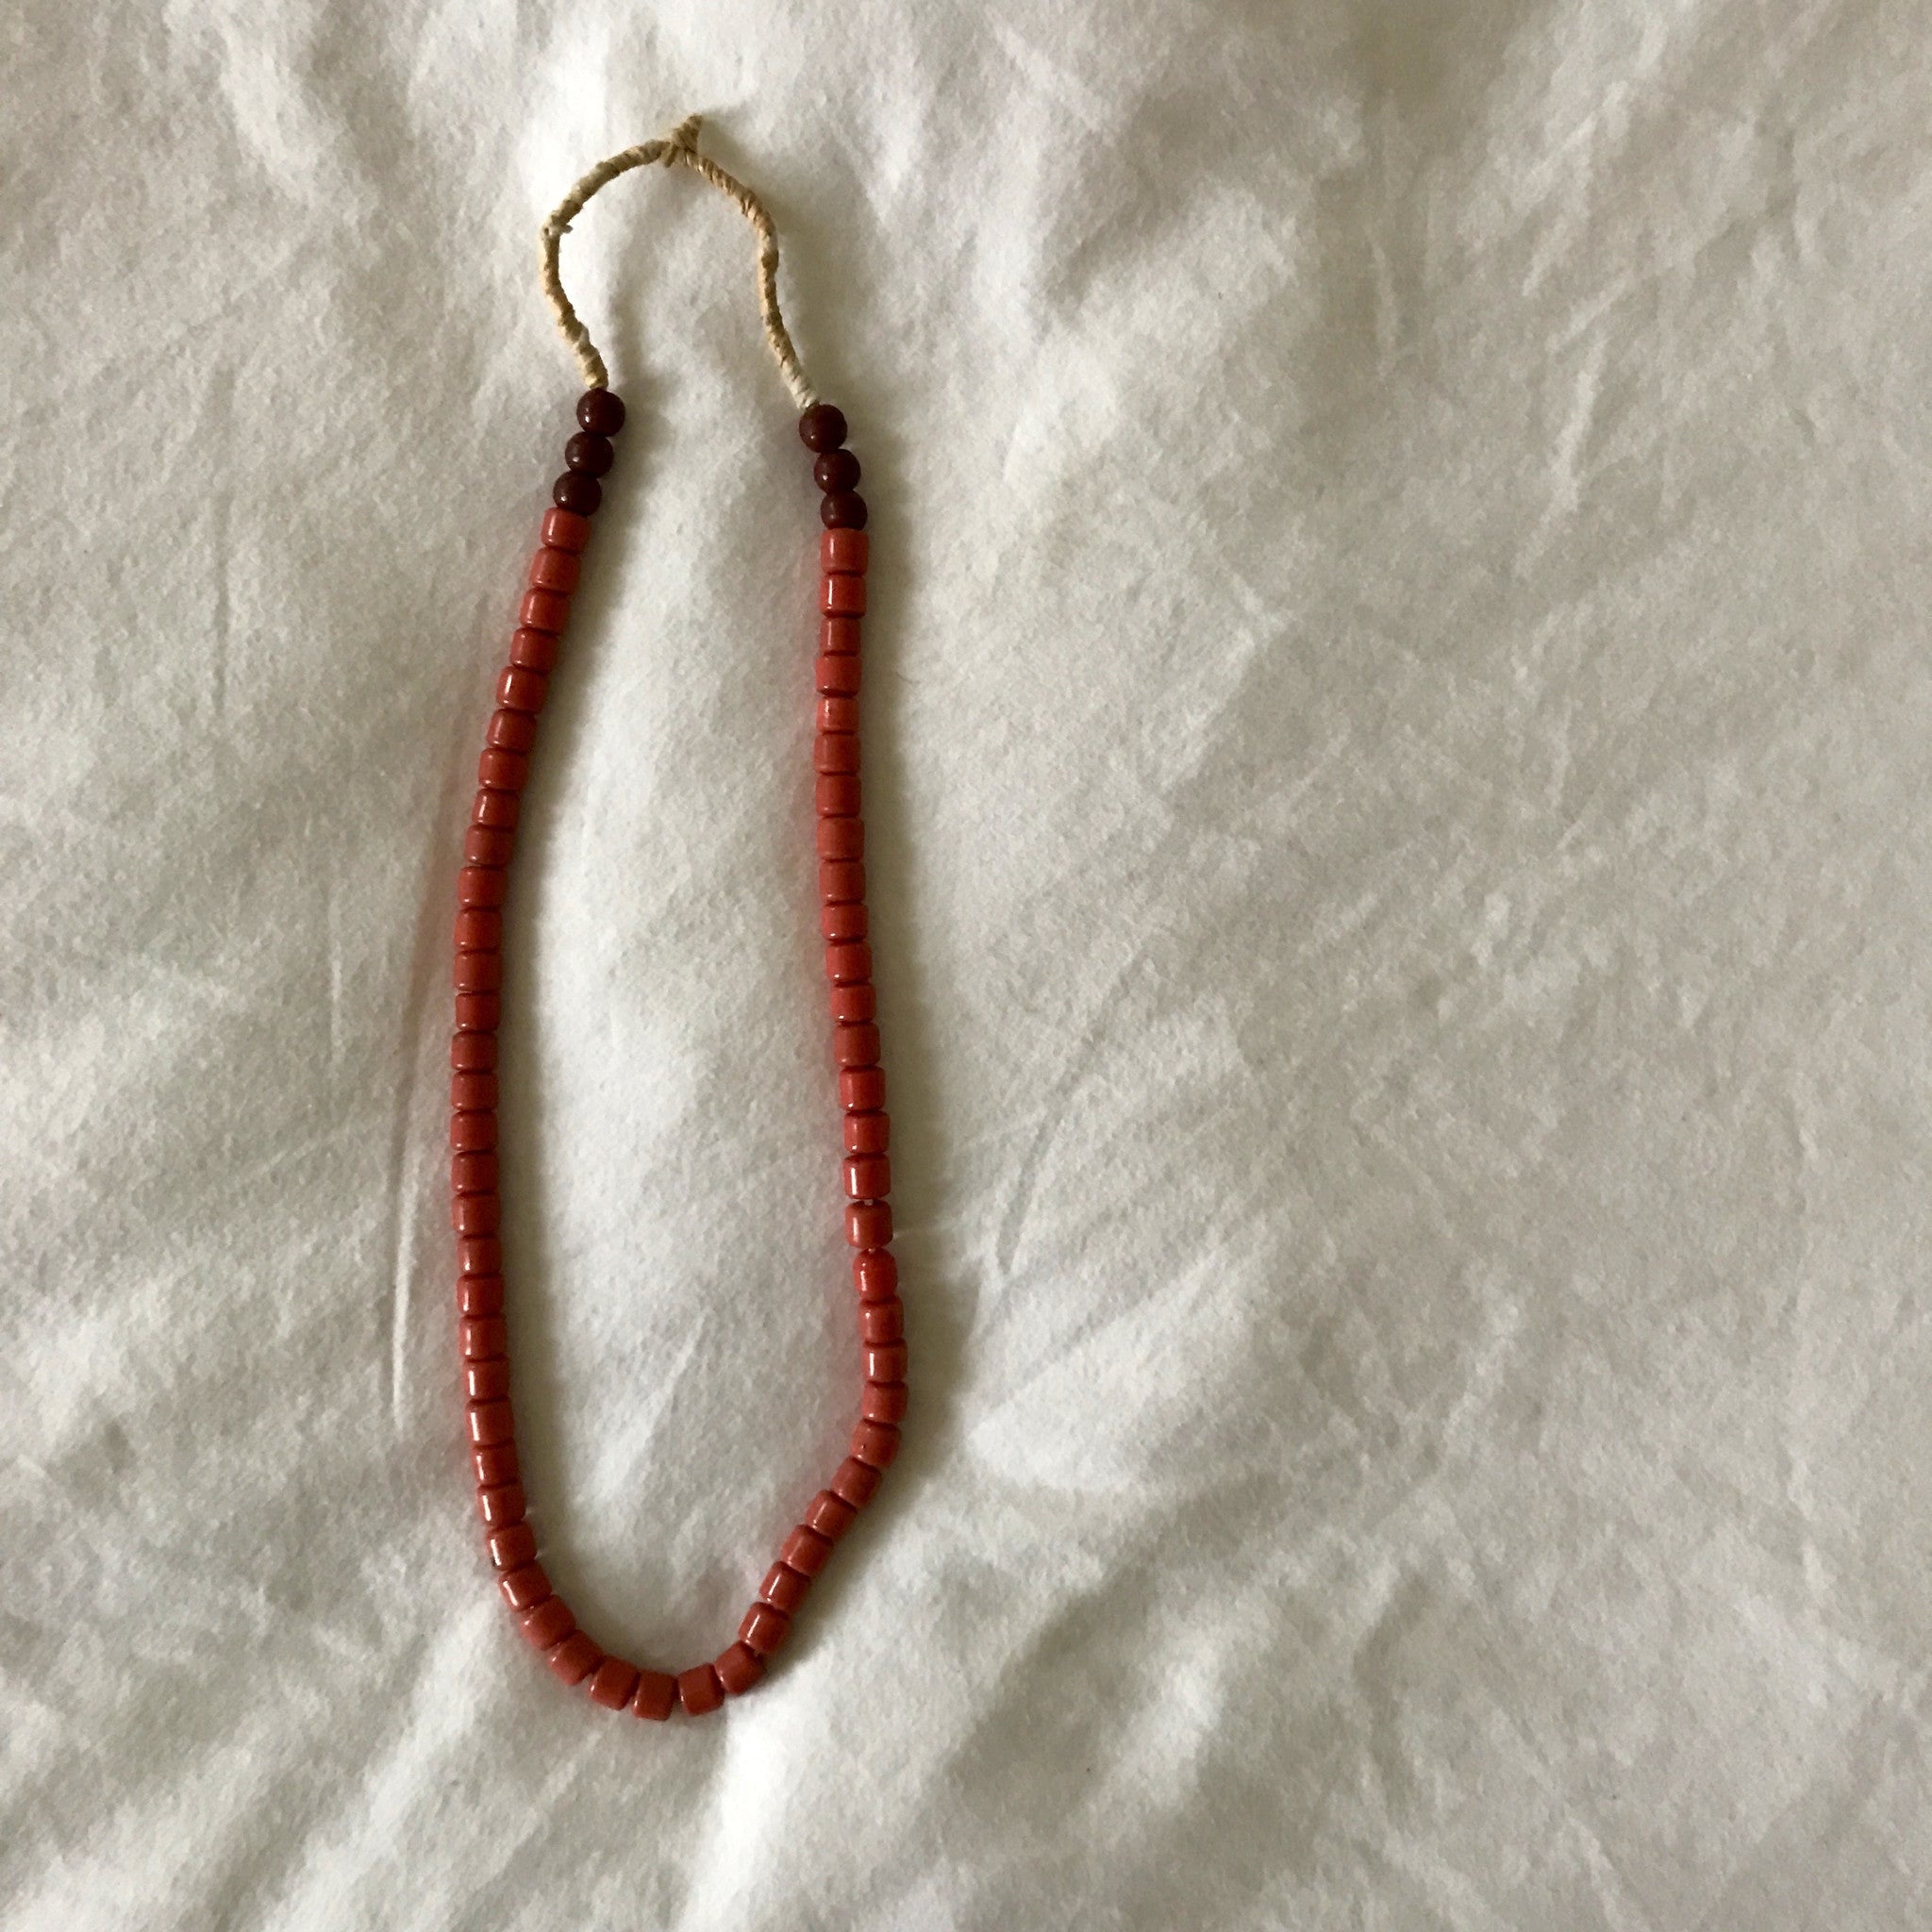 coral and maroon glass beads